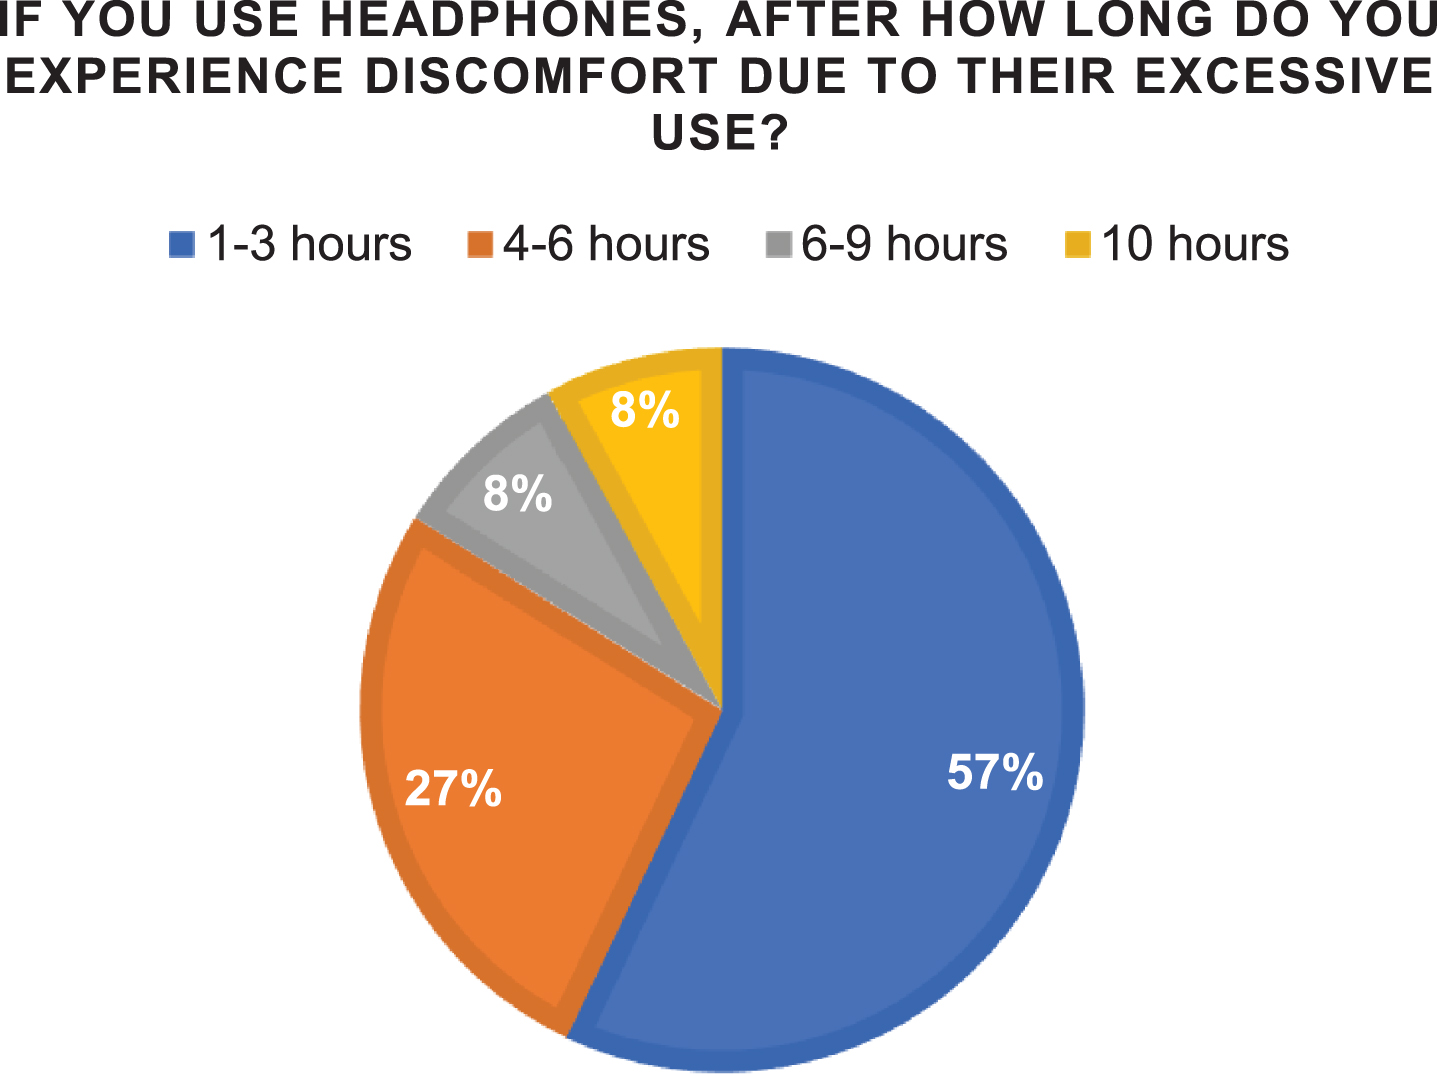 Percentages of time when discomfort of using headphones is arising.